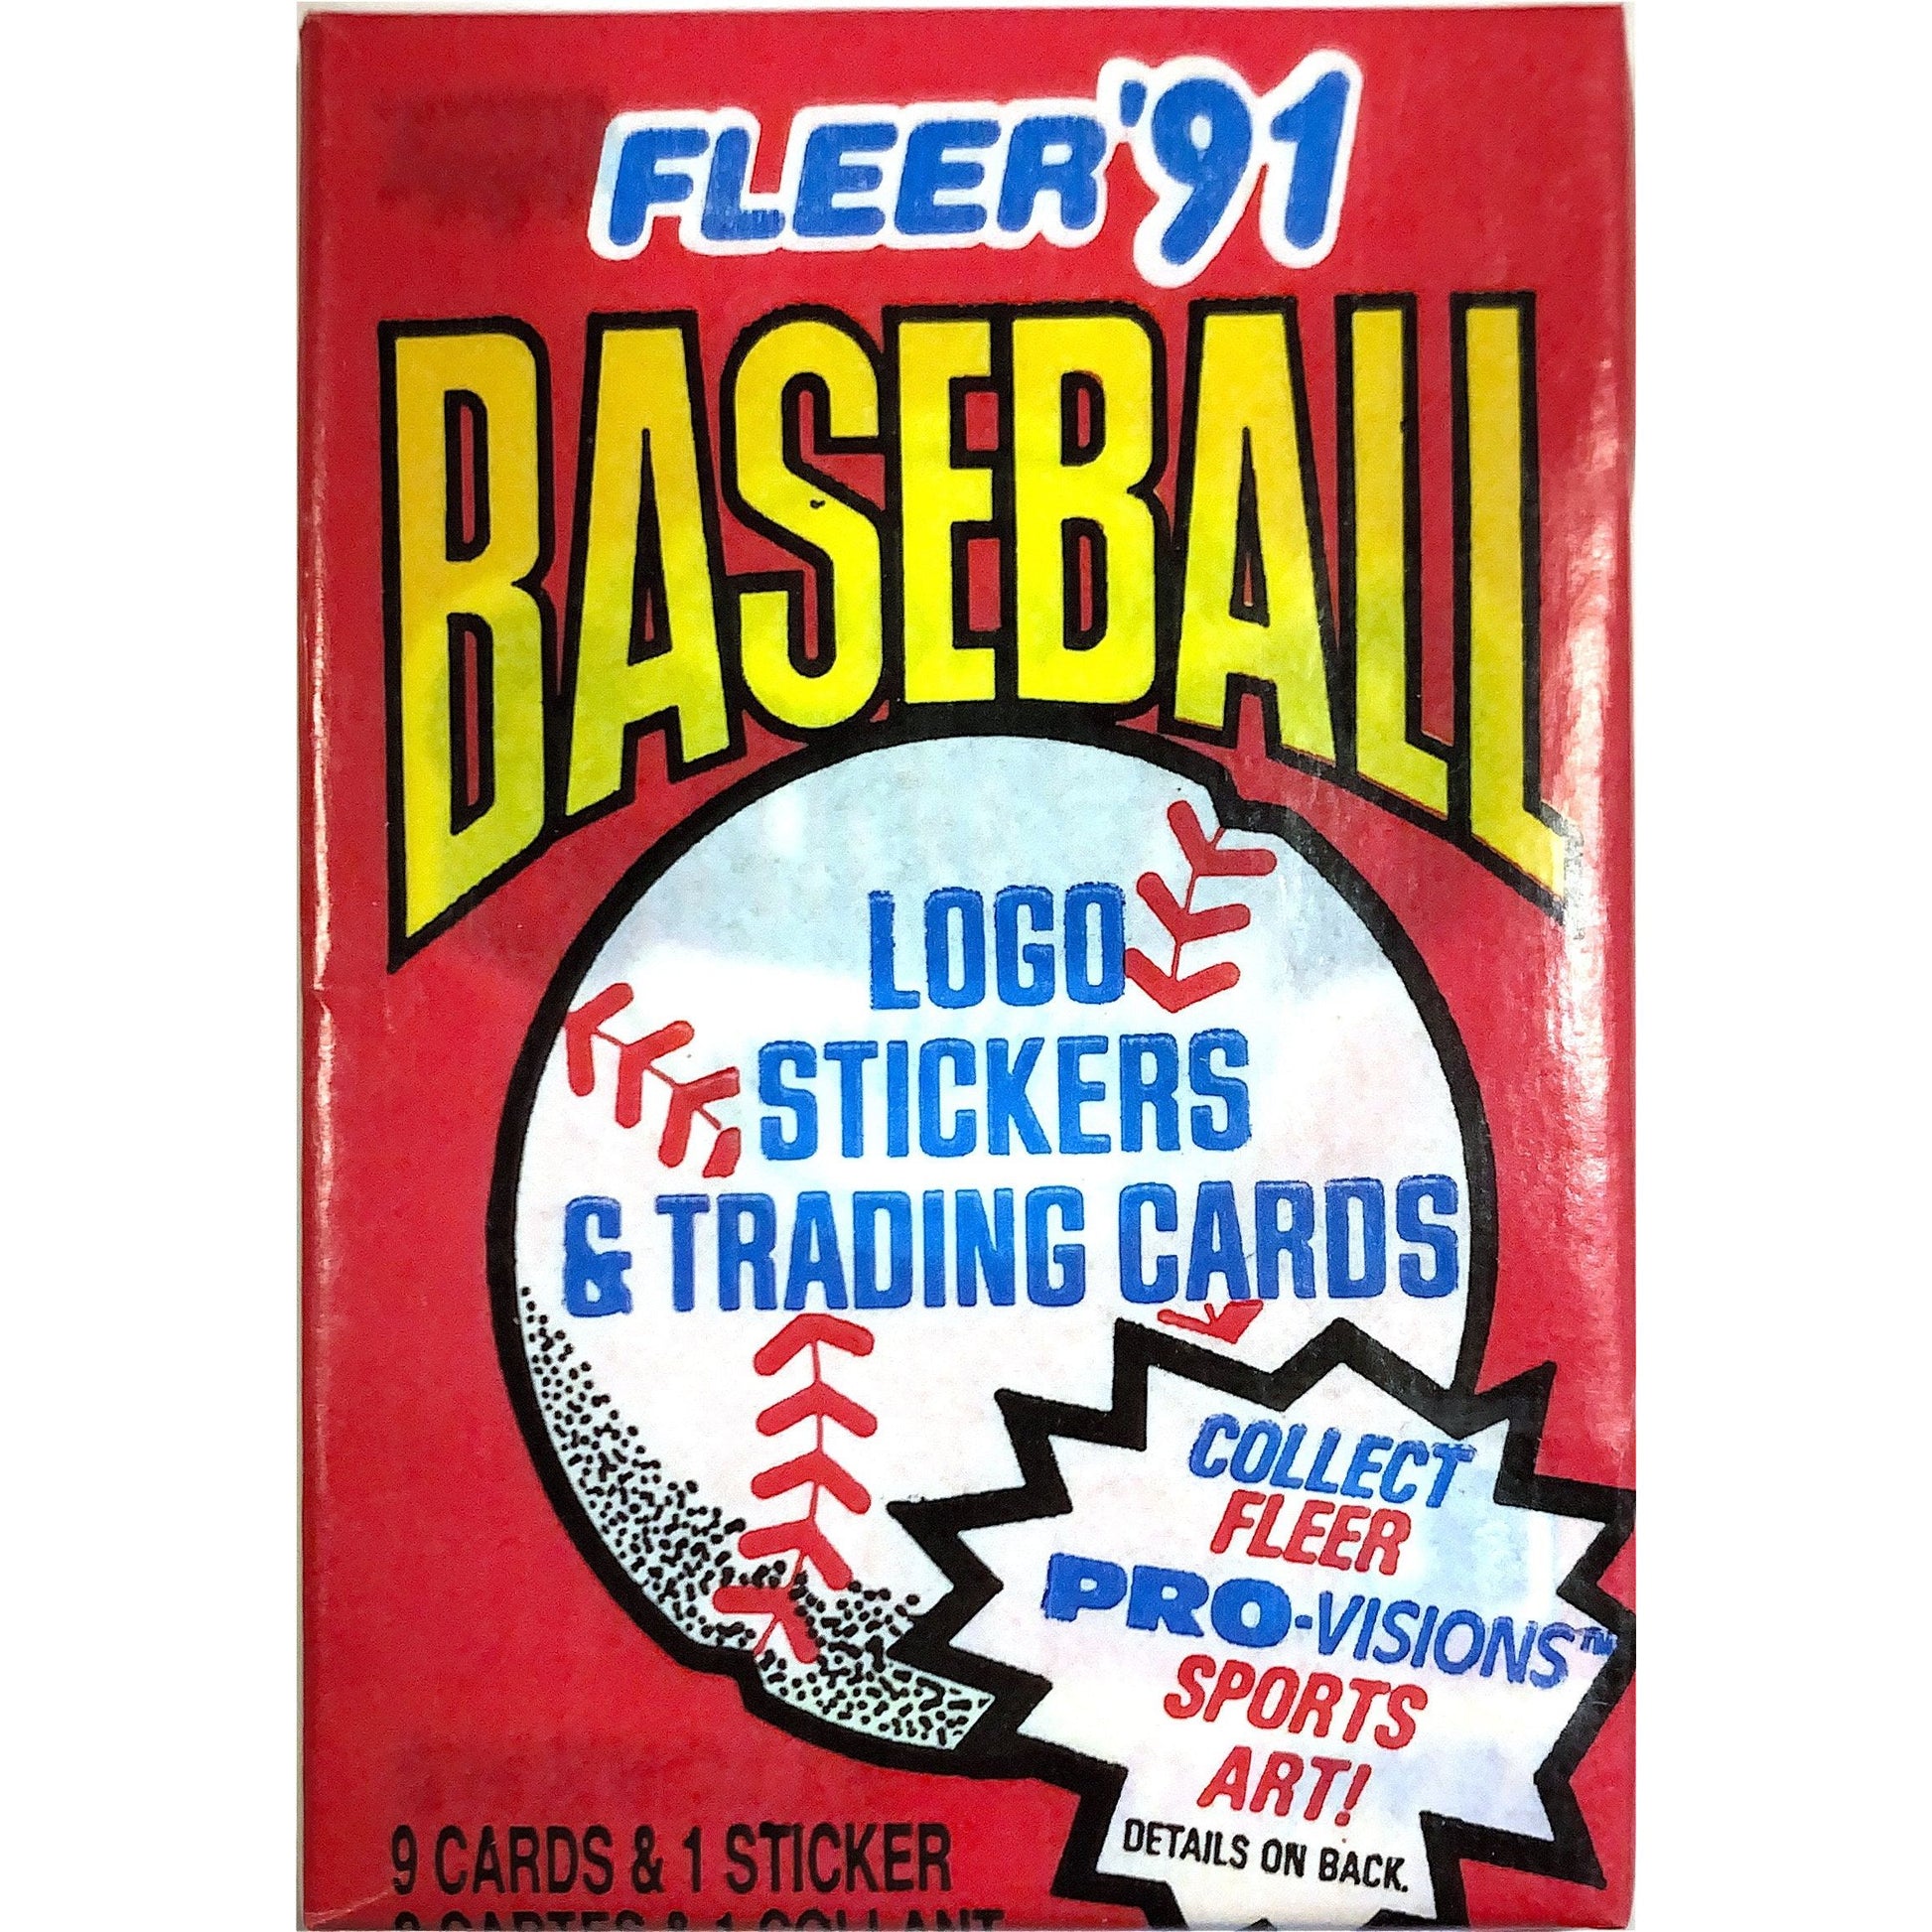  1991 Fleer Baseball Wax Pack  Local Legends Cards & Collectibles